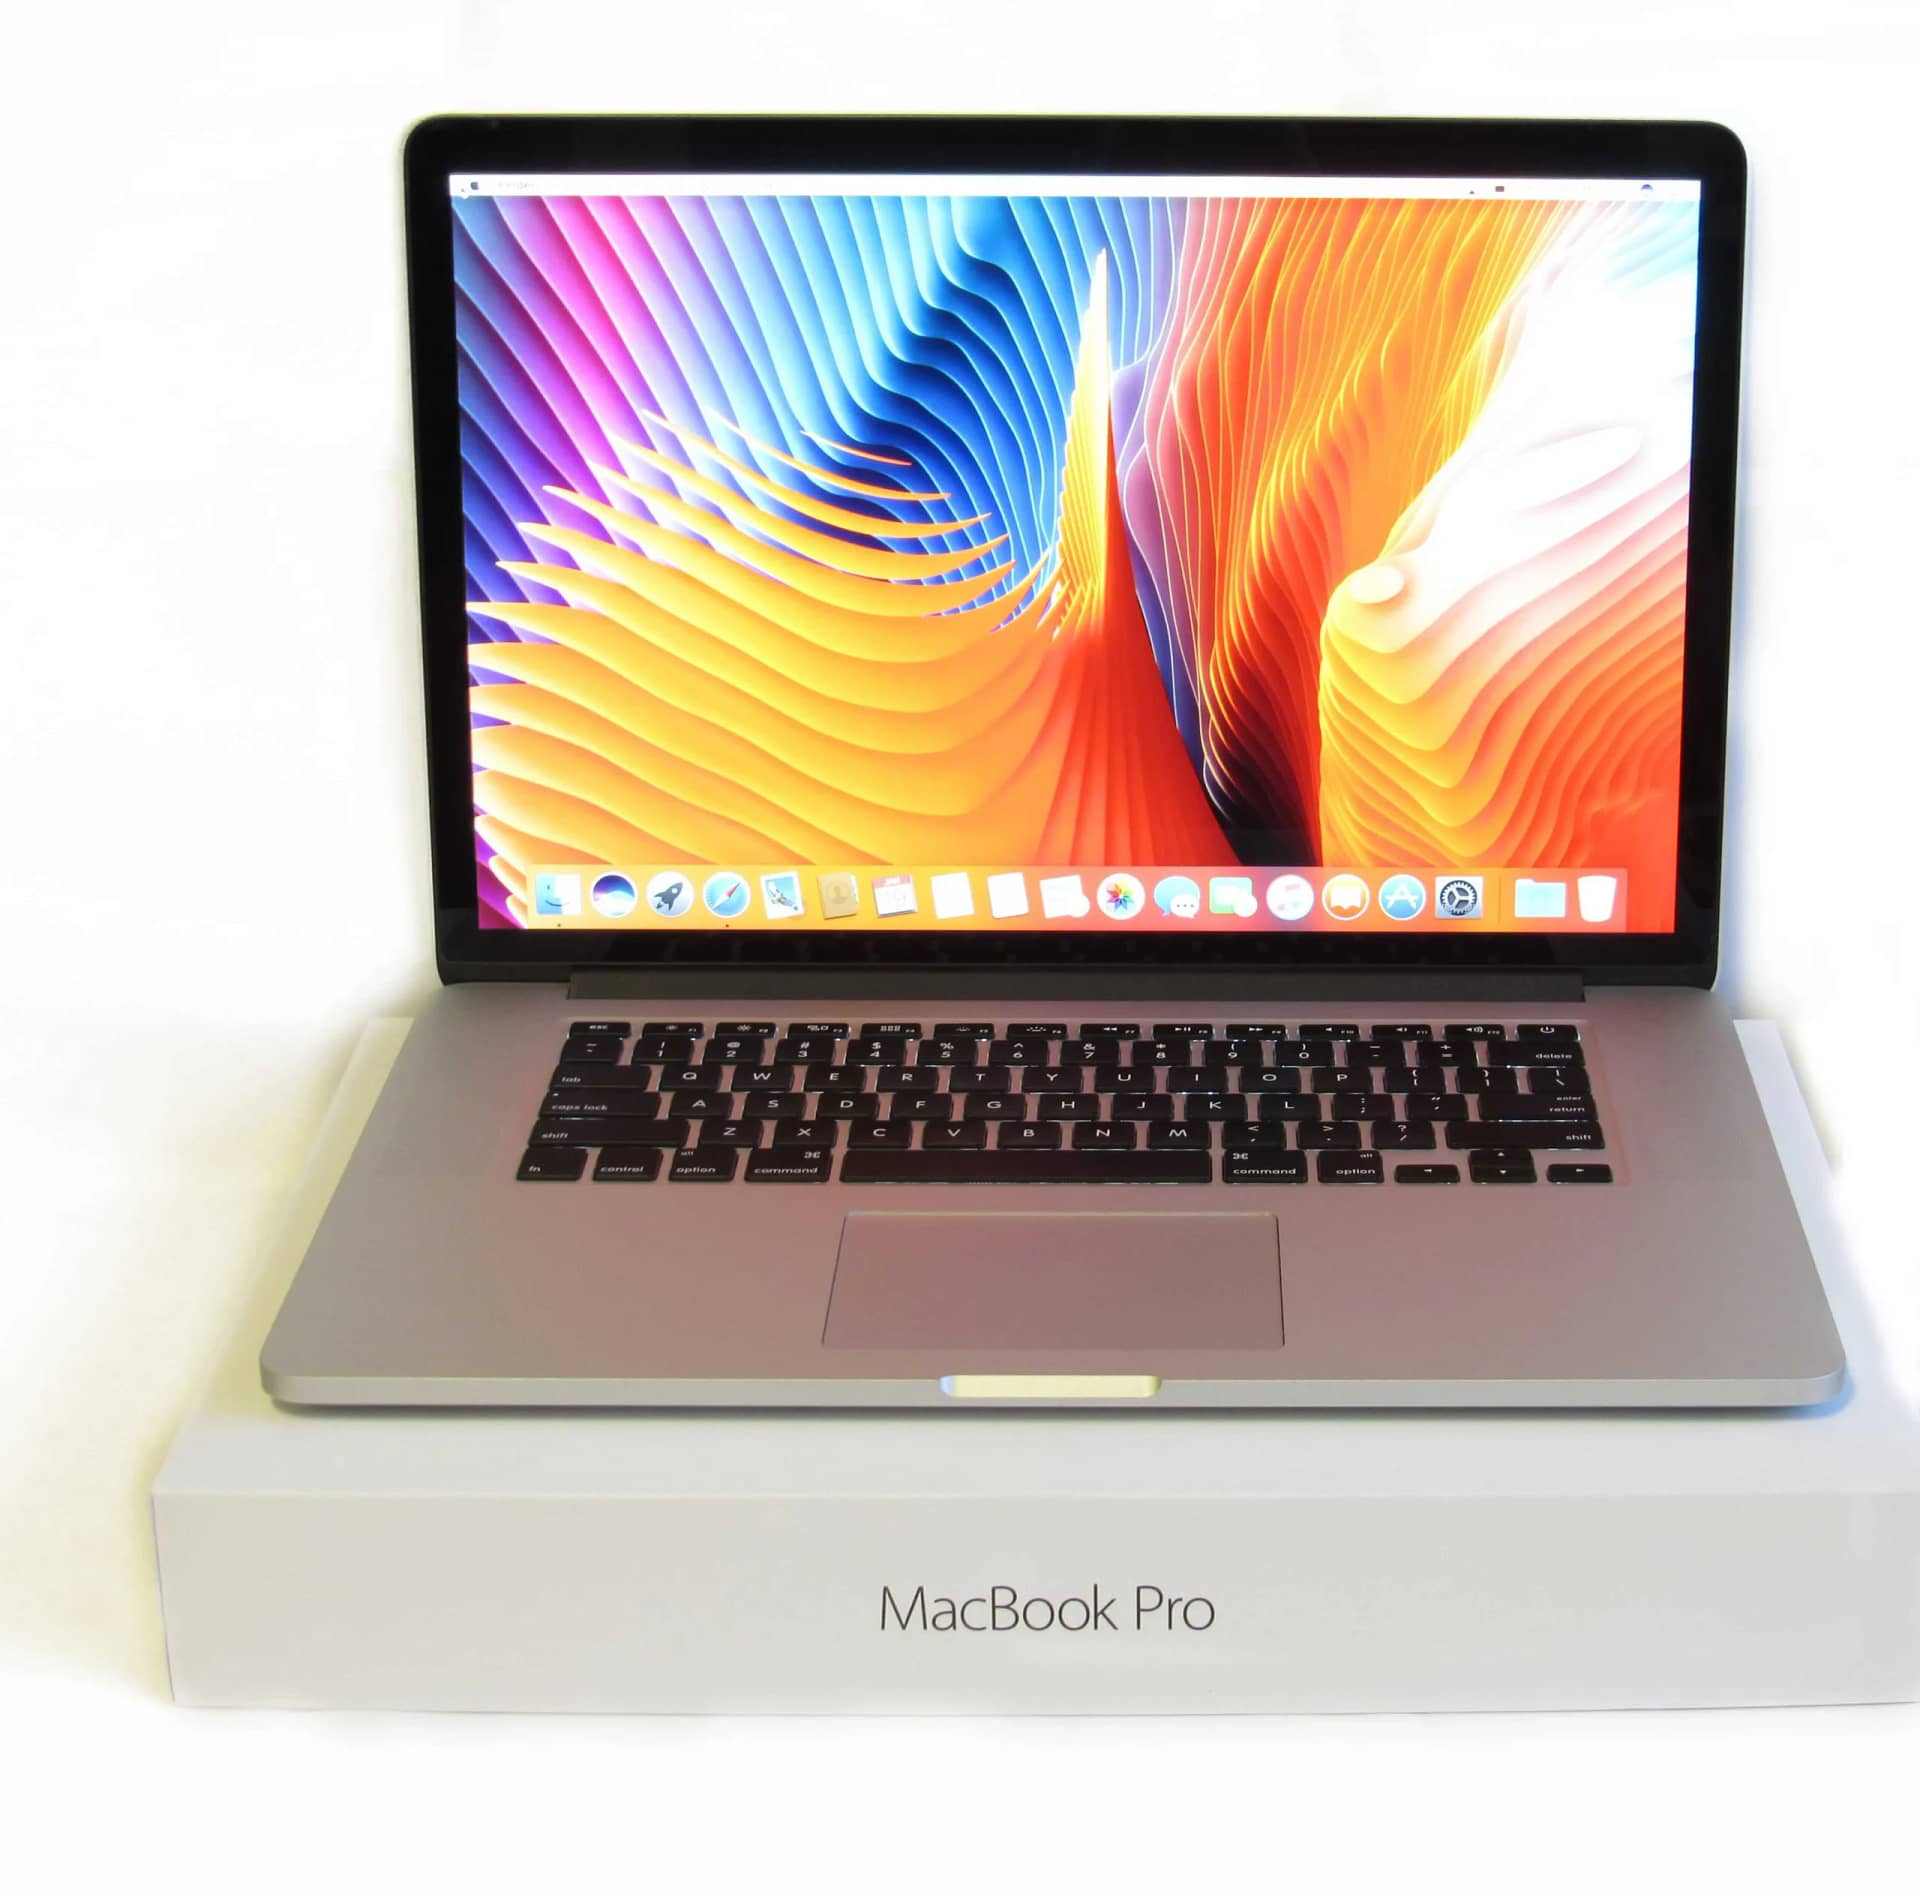 Apple MacBook Pro Retina 15 inch Mid 2015 Technical Specifications scaled